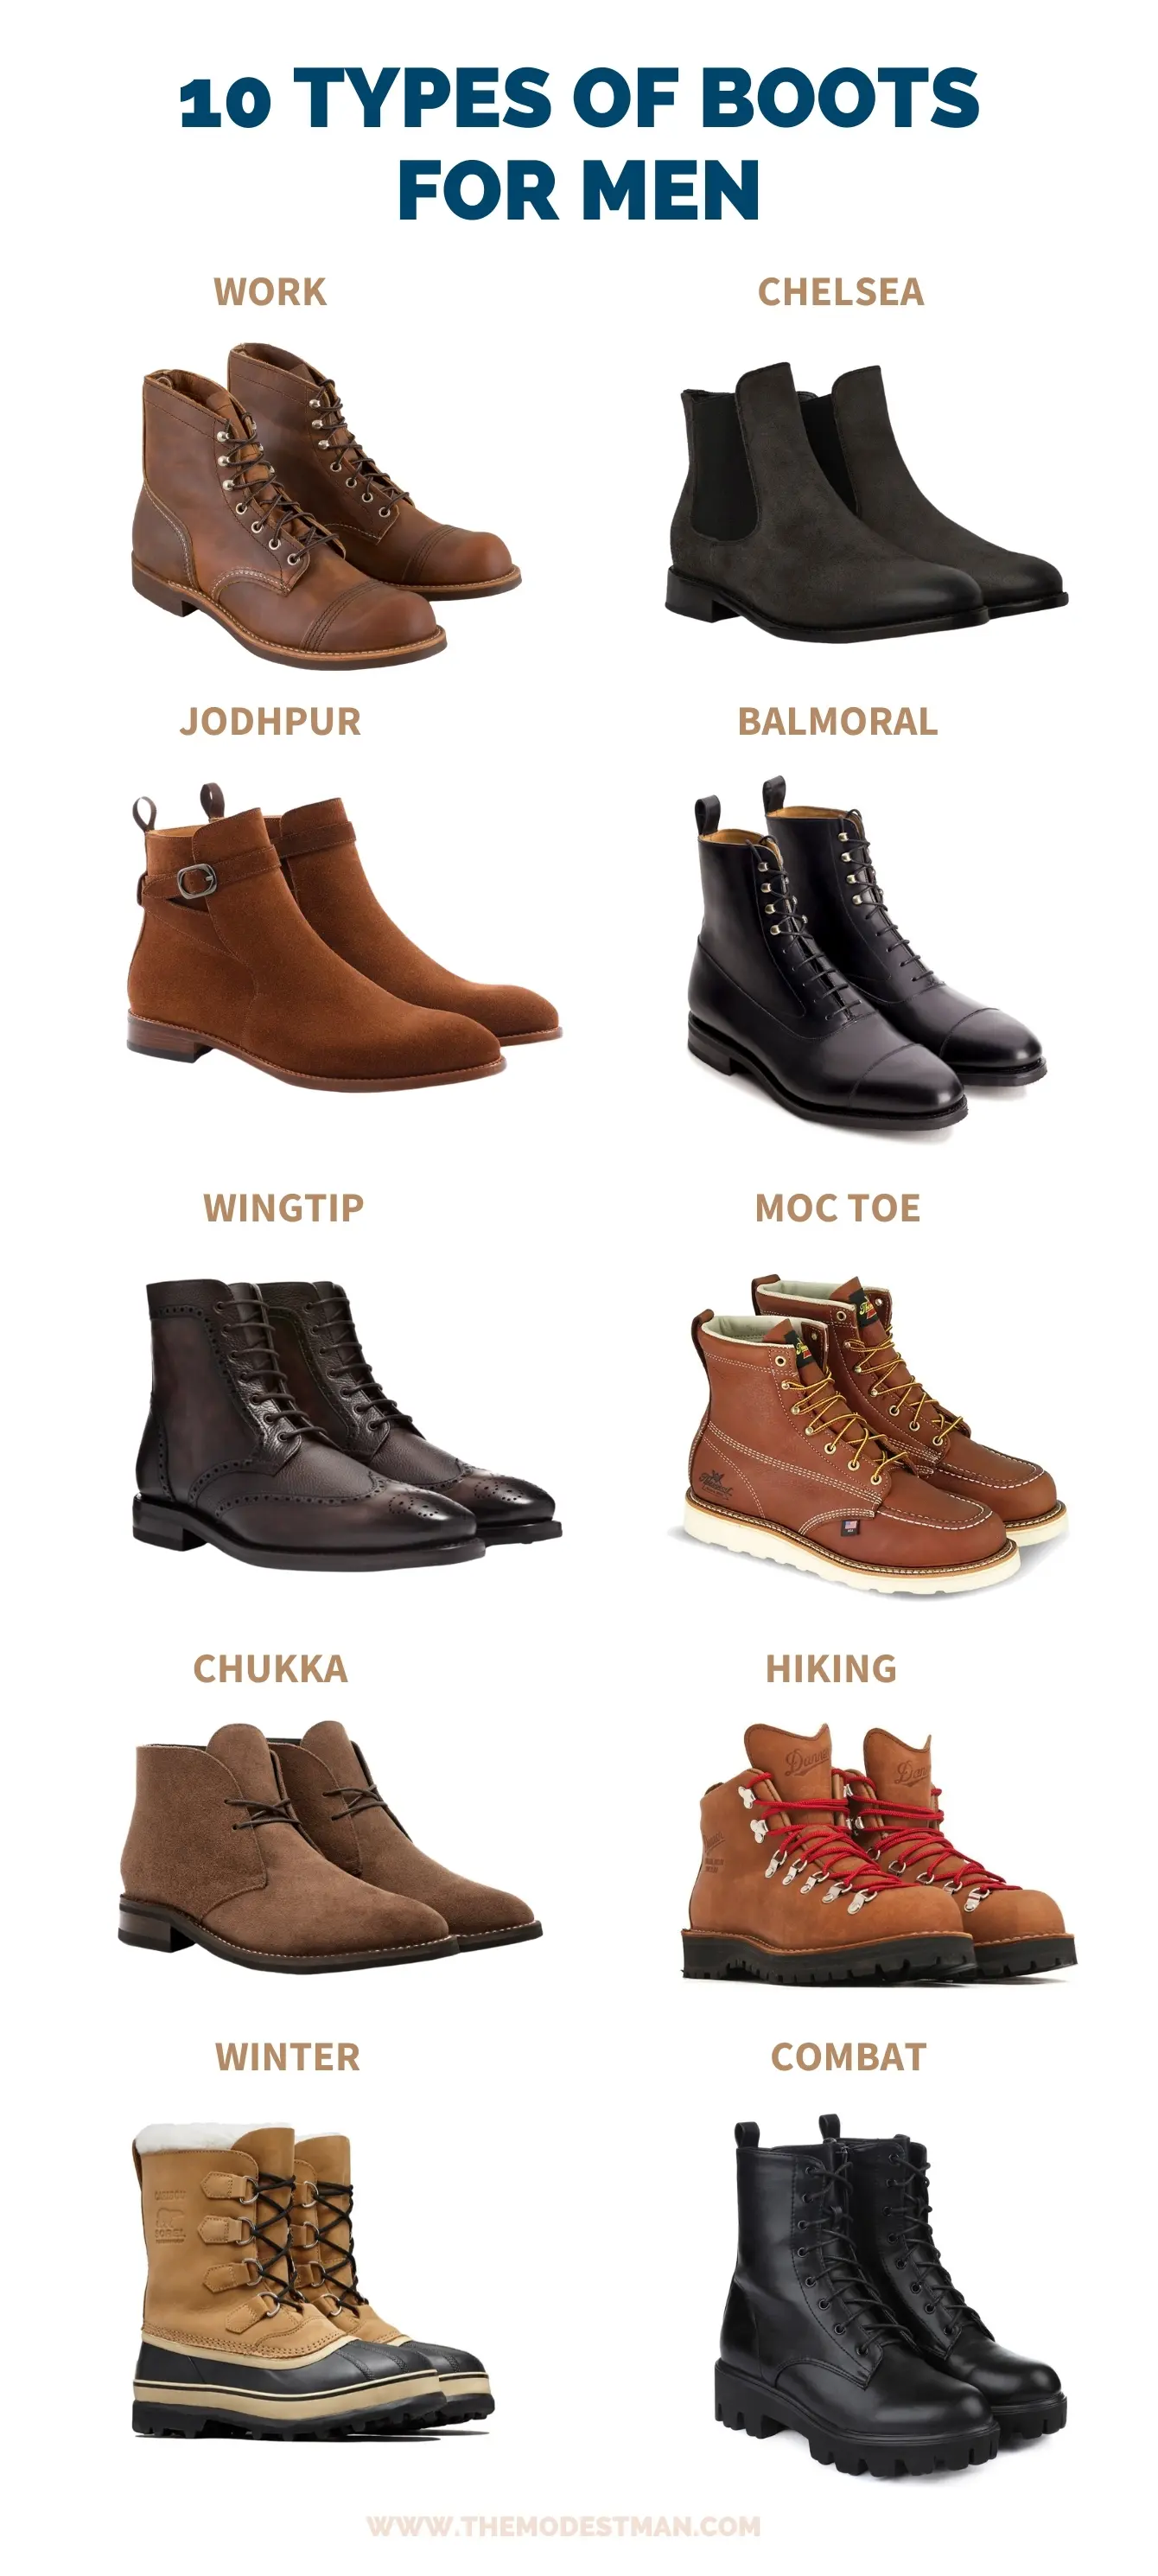 10 Best Types of Boots for Men (and My Top 3 Picks)